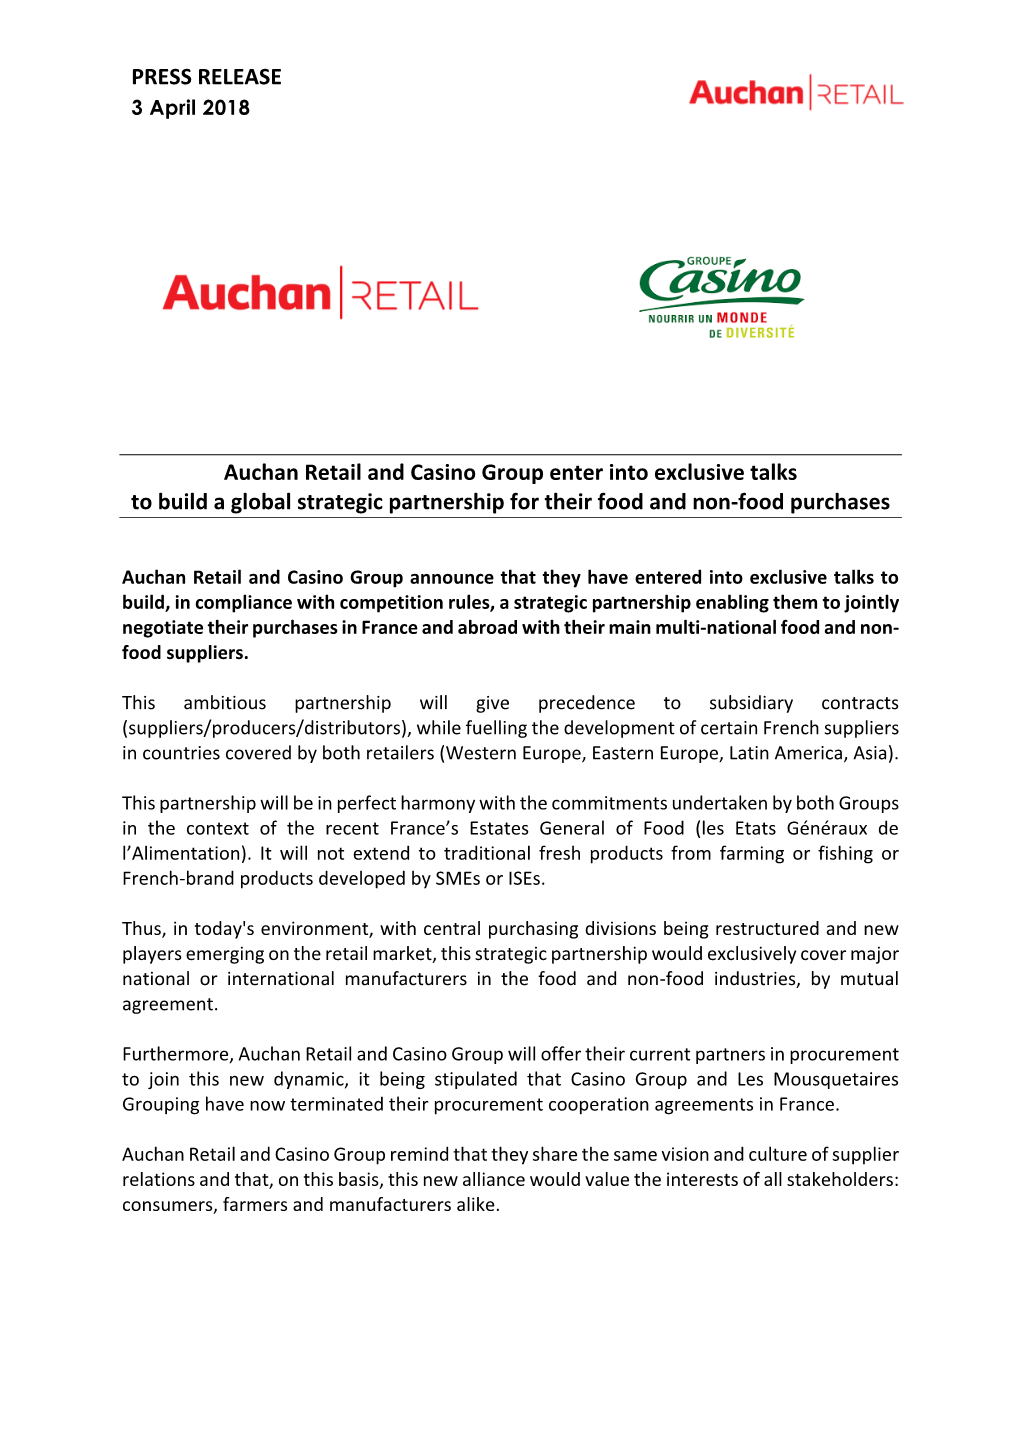 PRESS RELEASE Auchan Retail and Casino Group Enter Into Exclusive